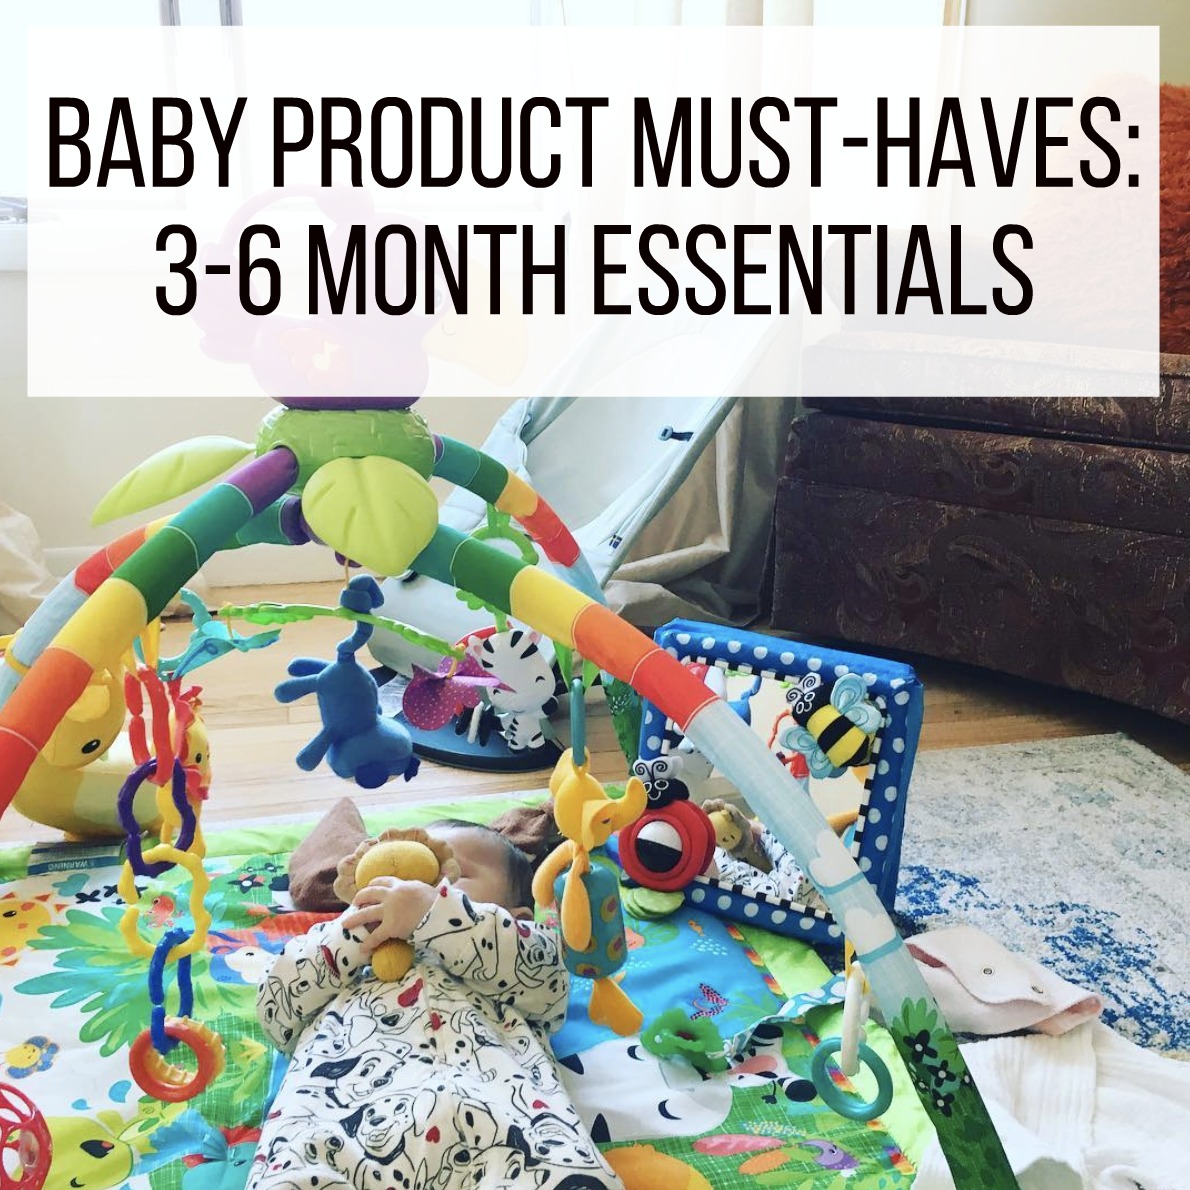 Baby Product Must-Haves: 3-6 Month Essentials